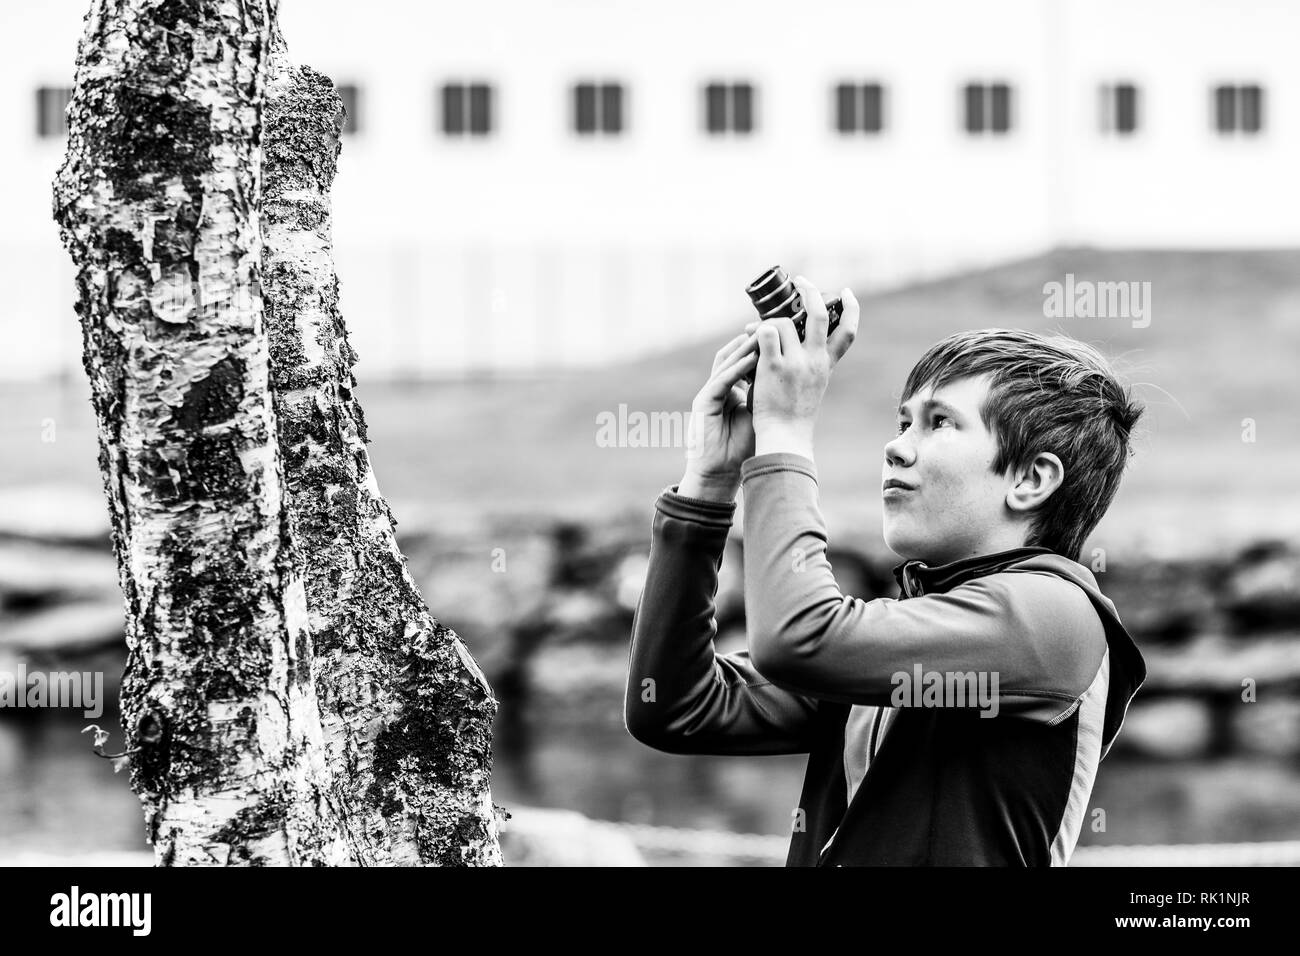 Candid portrait of boy photographing tree with digital camera, black and white image Stock Photo